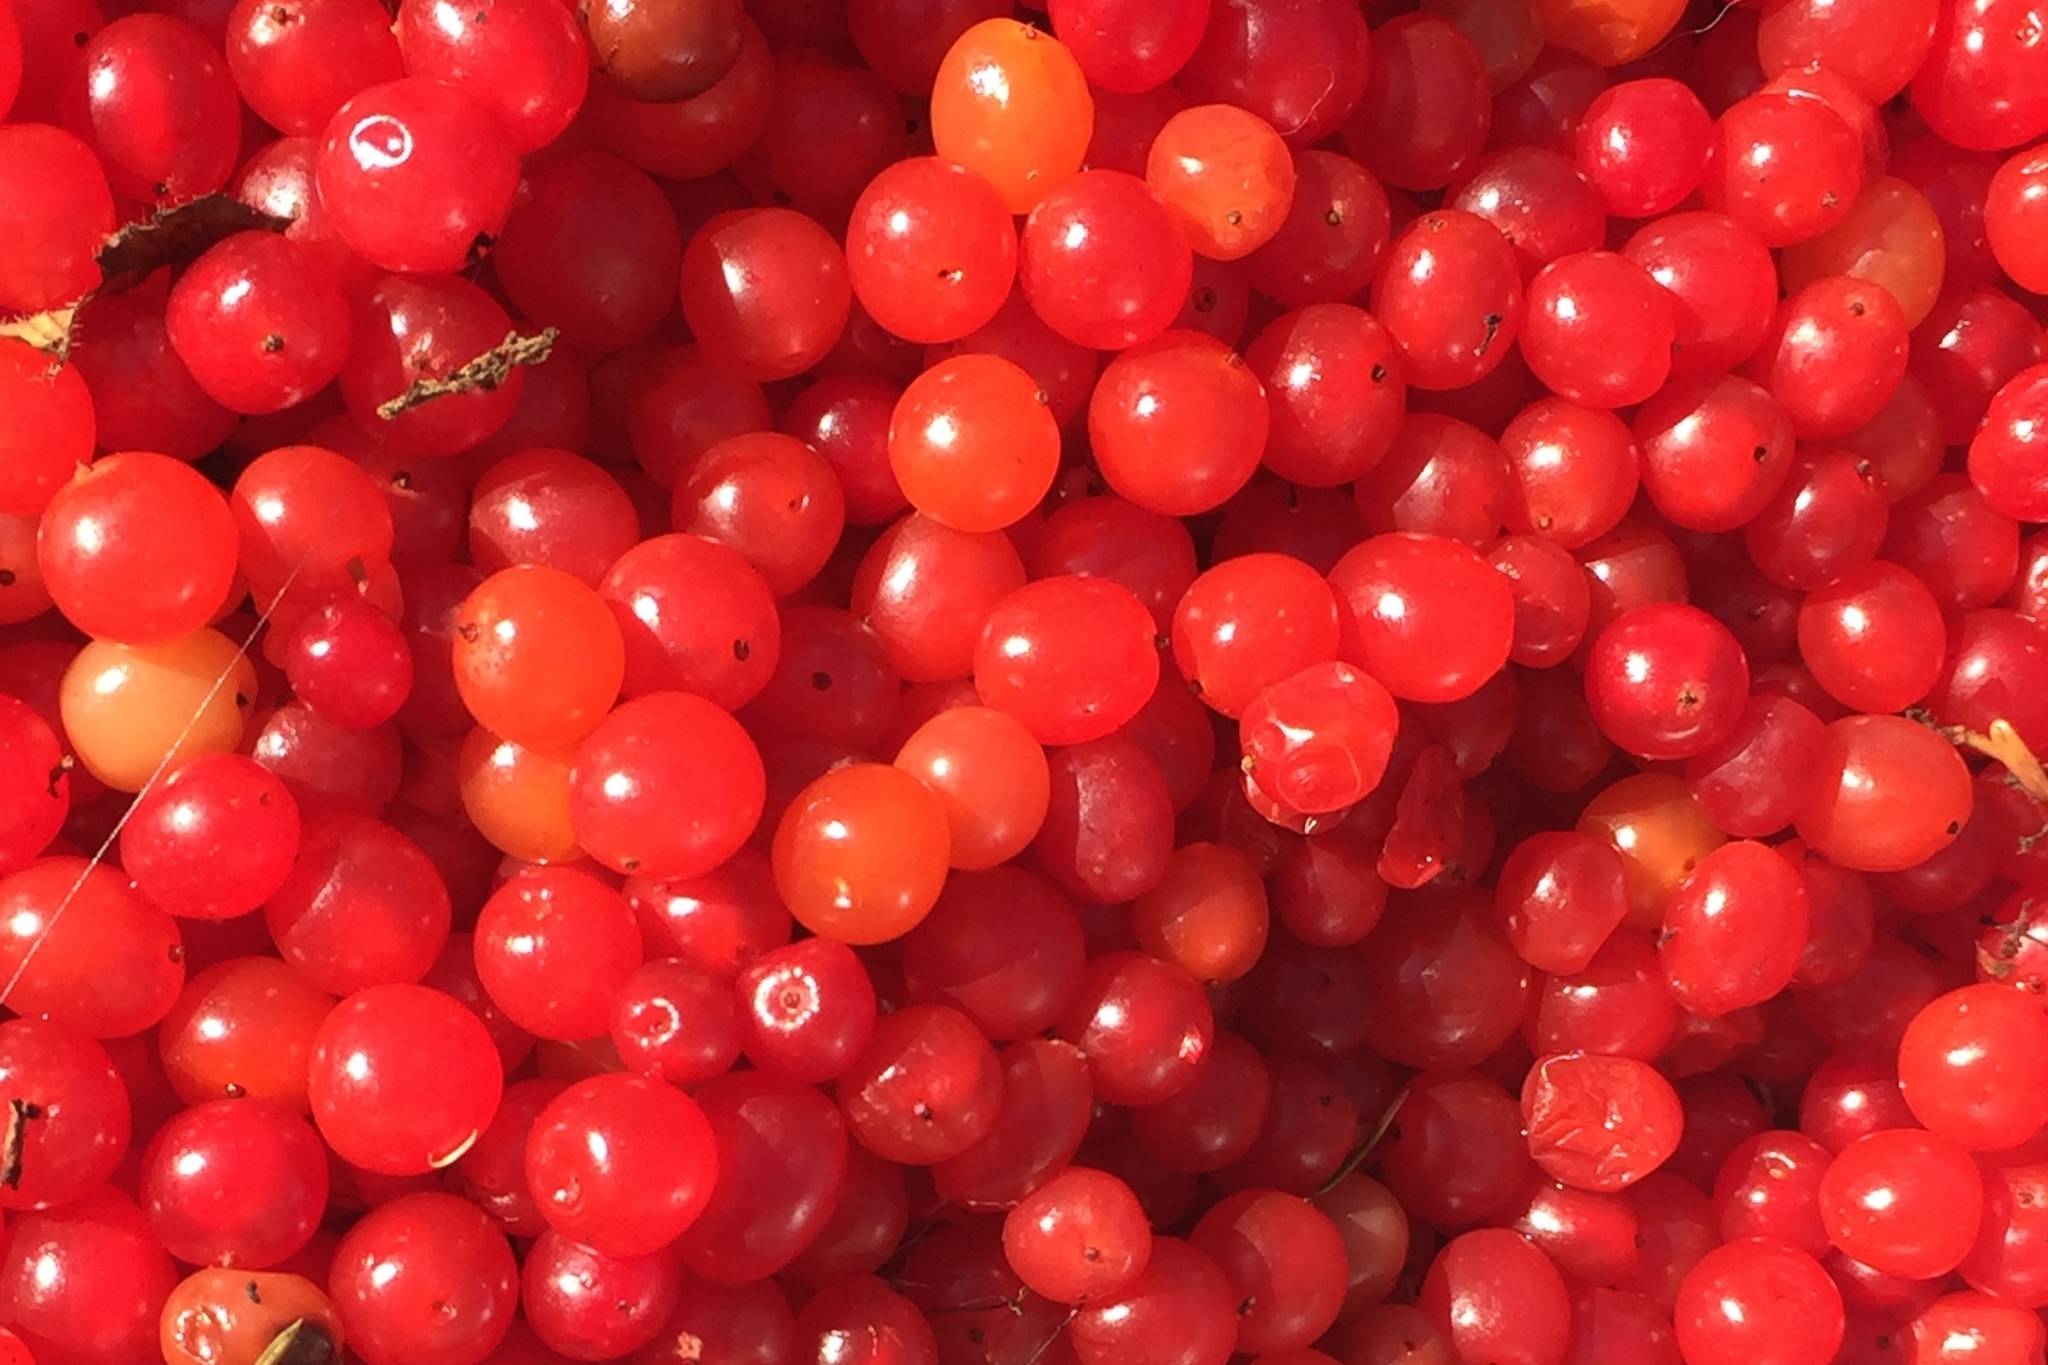 Despite their name, highbush cranberries aren’t actually cranberries. High bush cranberries are actually in the honeysuckle family and are closely related to elderberries. (Vivian Mork Yéilk’ / For the Capital City Weekly)